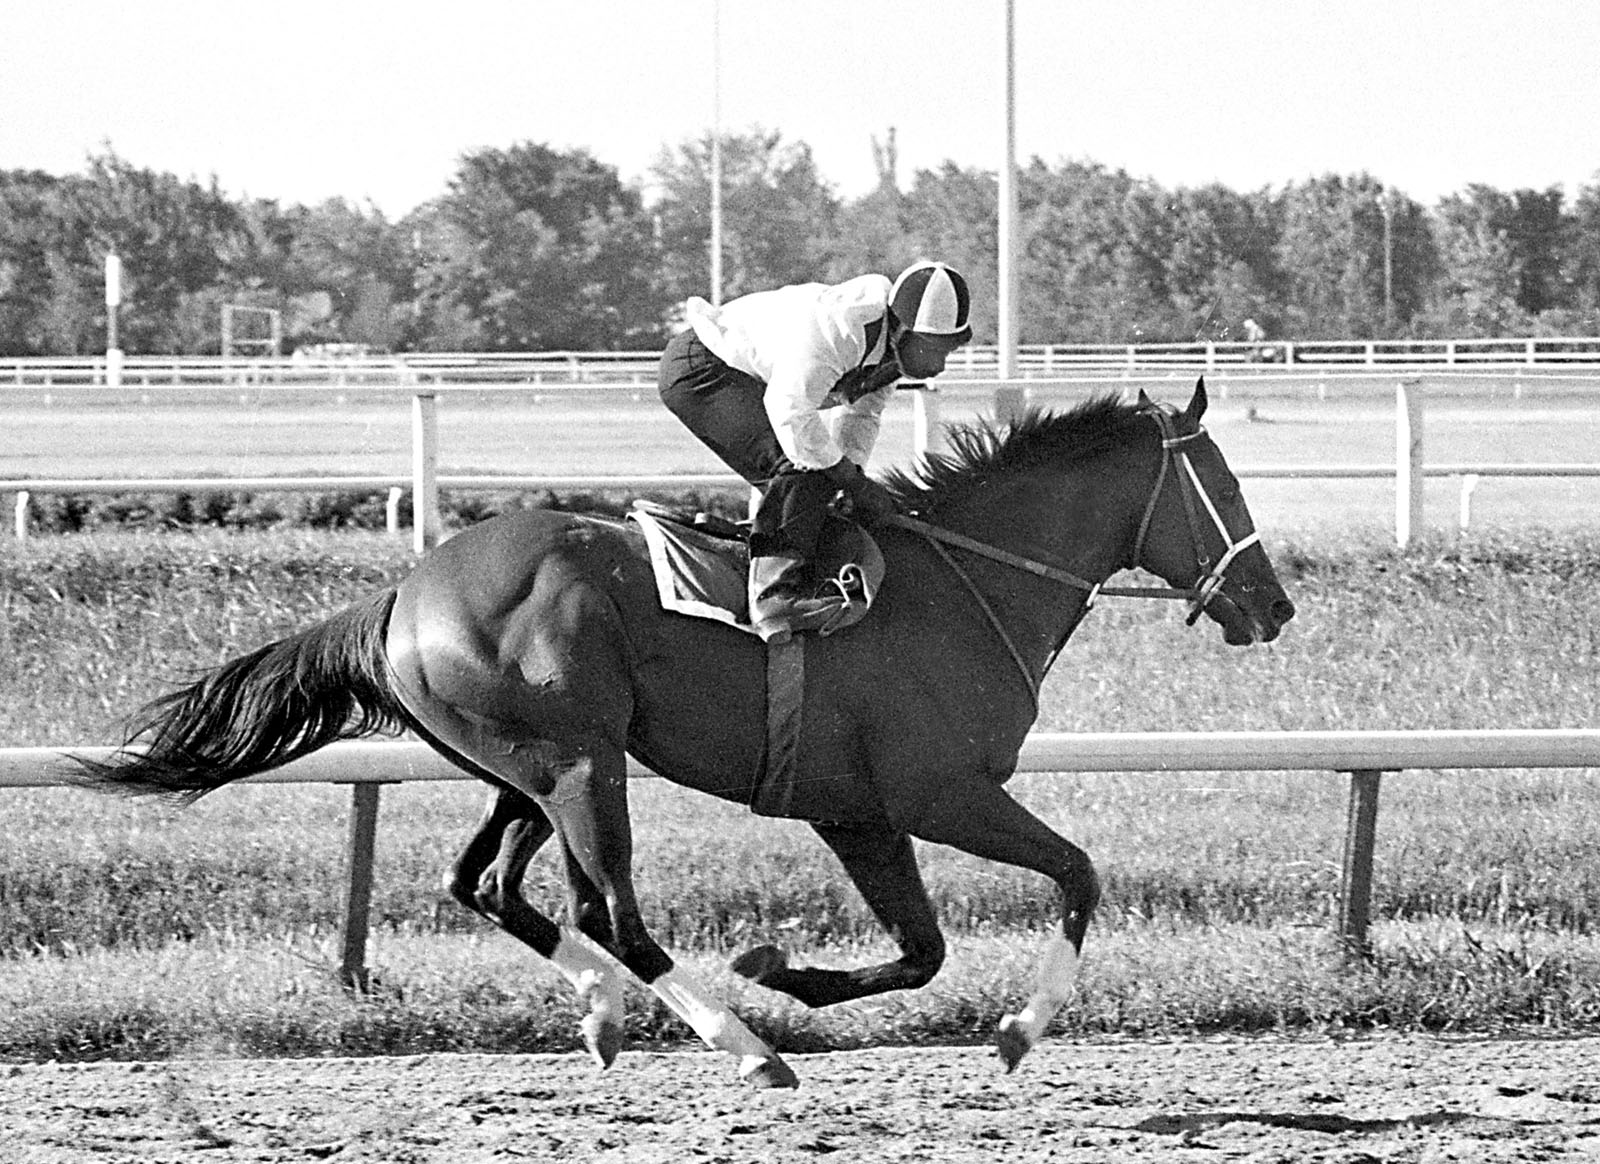 Triple Crown winner Secretariat has four feet in the air as he gallops during a workout with exercise jockey George Davis in saddle at Arlington Park race track in Arlington Heights, Ill., Friday morning, June 29, 1973.  Secretariat, winner of the Kentucky Derby, Preakness, and Belmont Stakes, will take on three other horses in running of the Arlington Invitational Saturday.  (AP Photo)